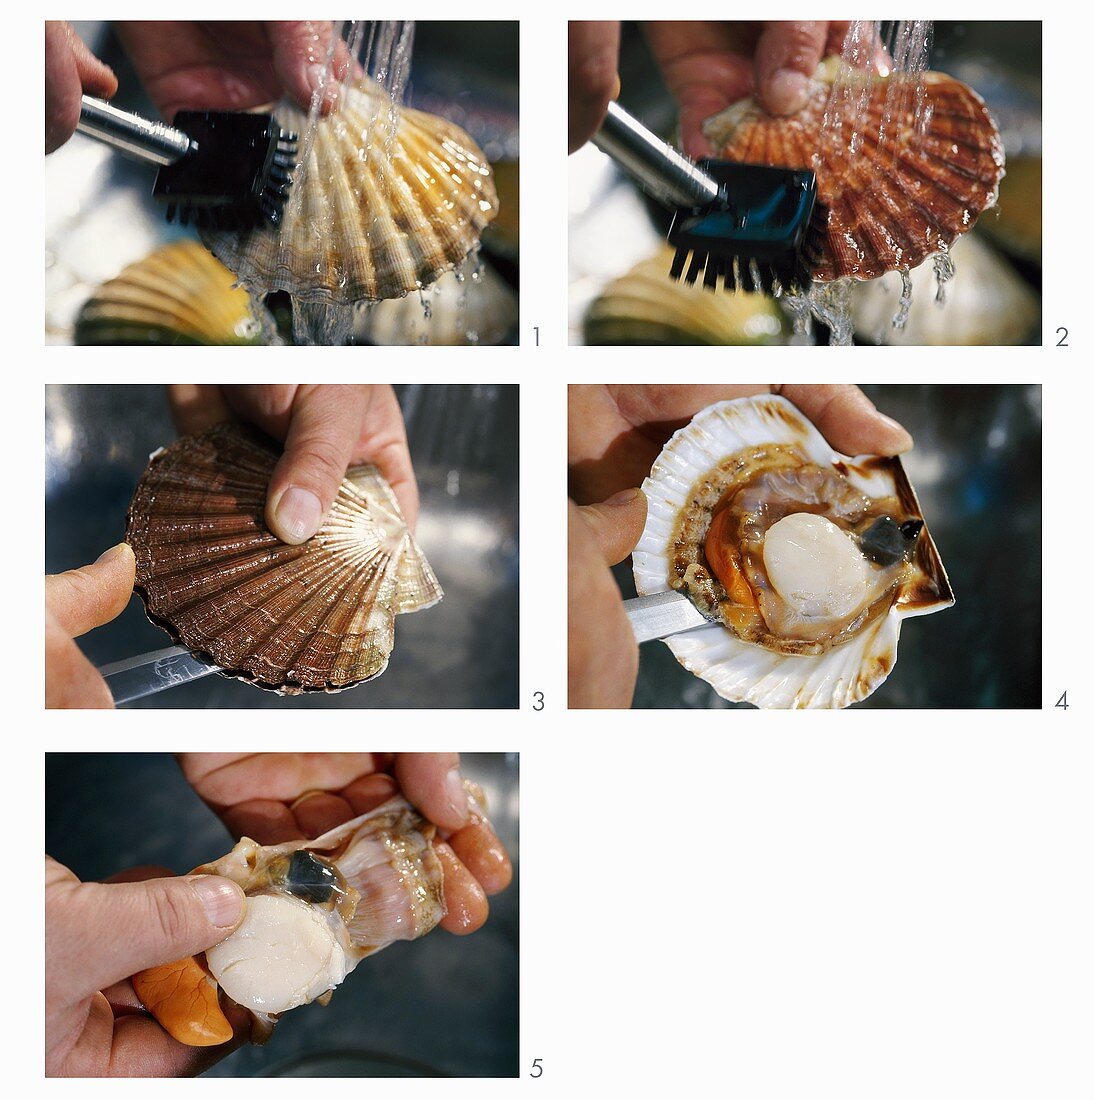 Cleaning and shucking scallops